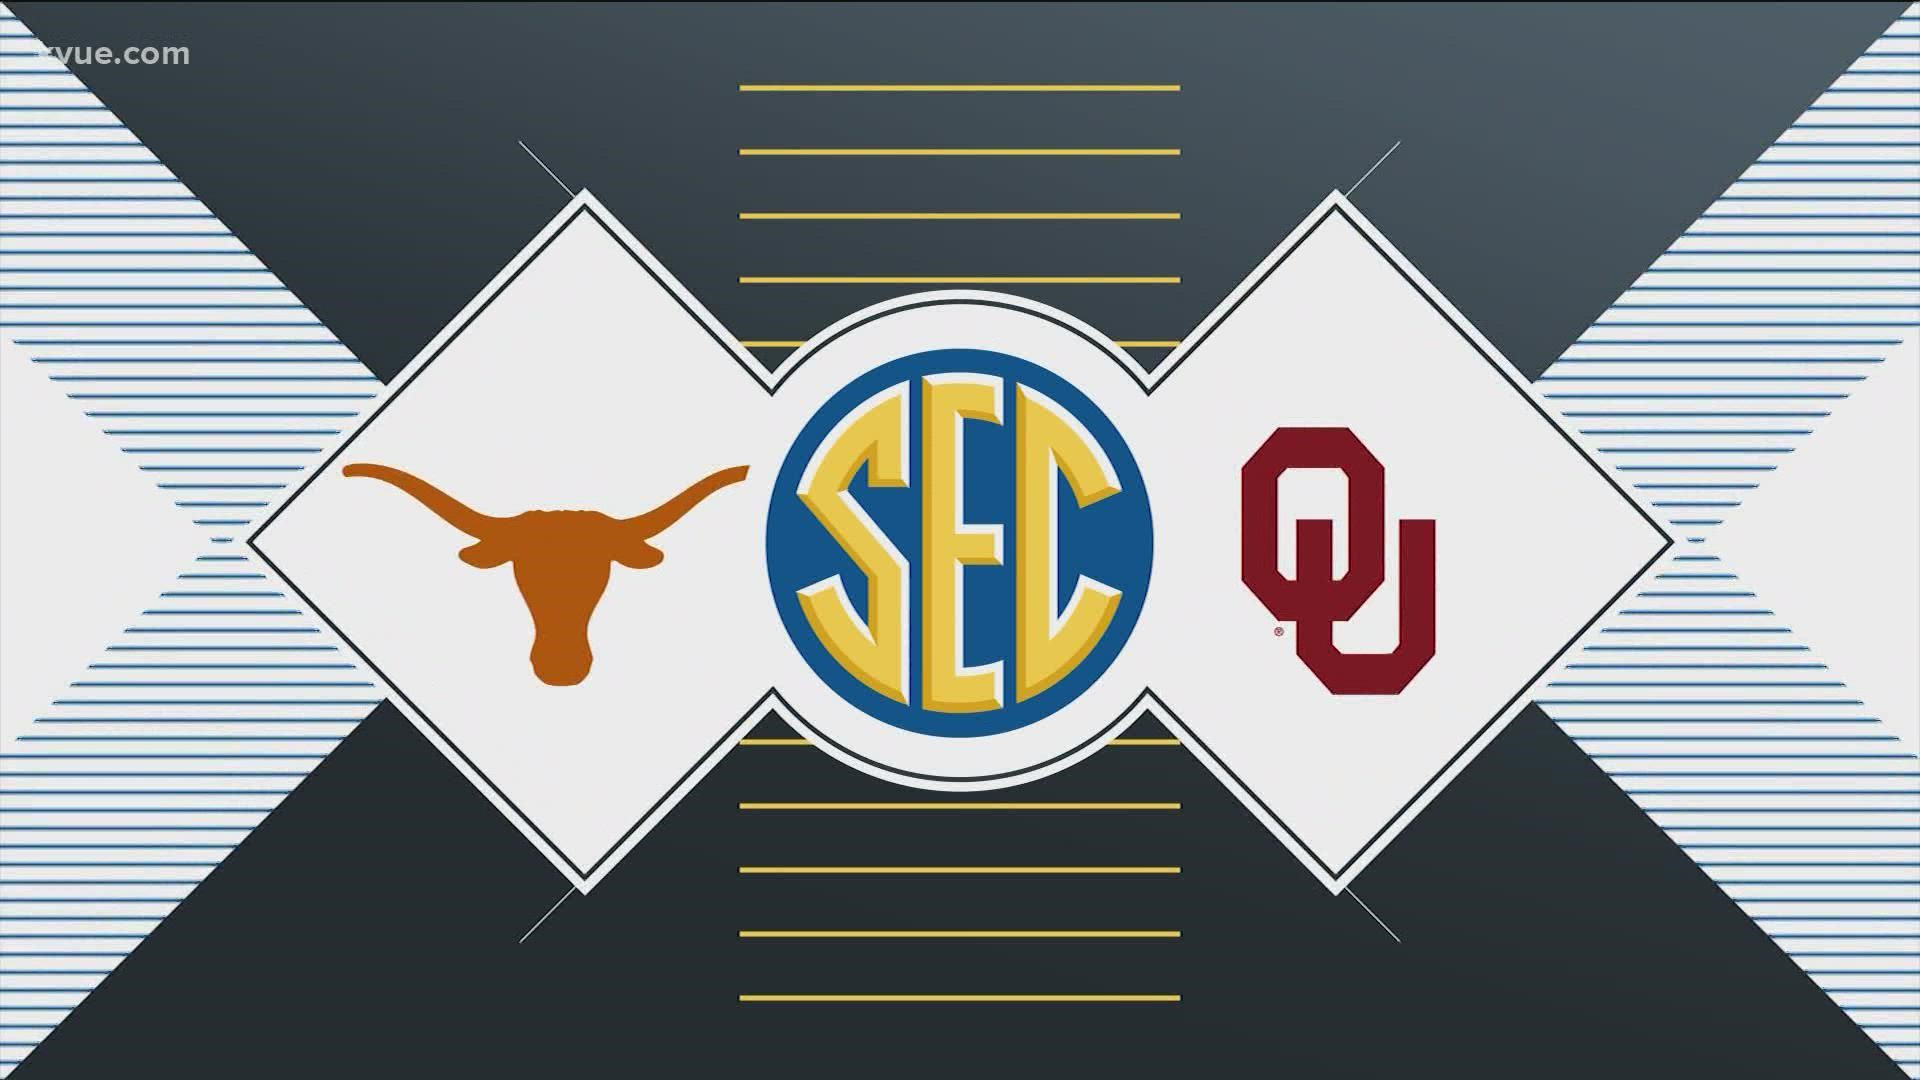 The Texas and Oklahoma Board of Regents voted to approve their universities joining the conference.